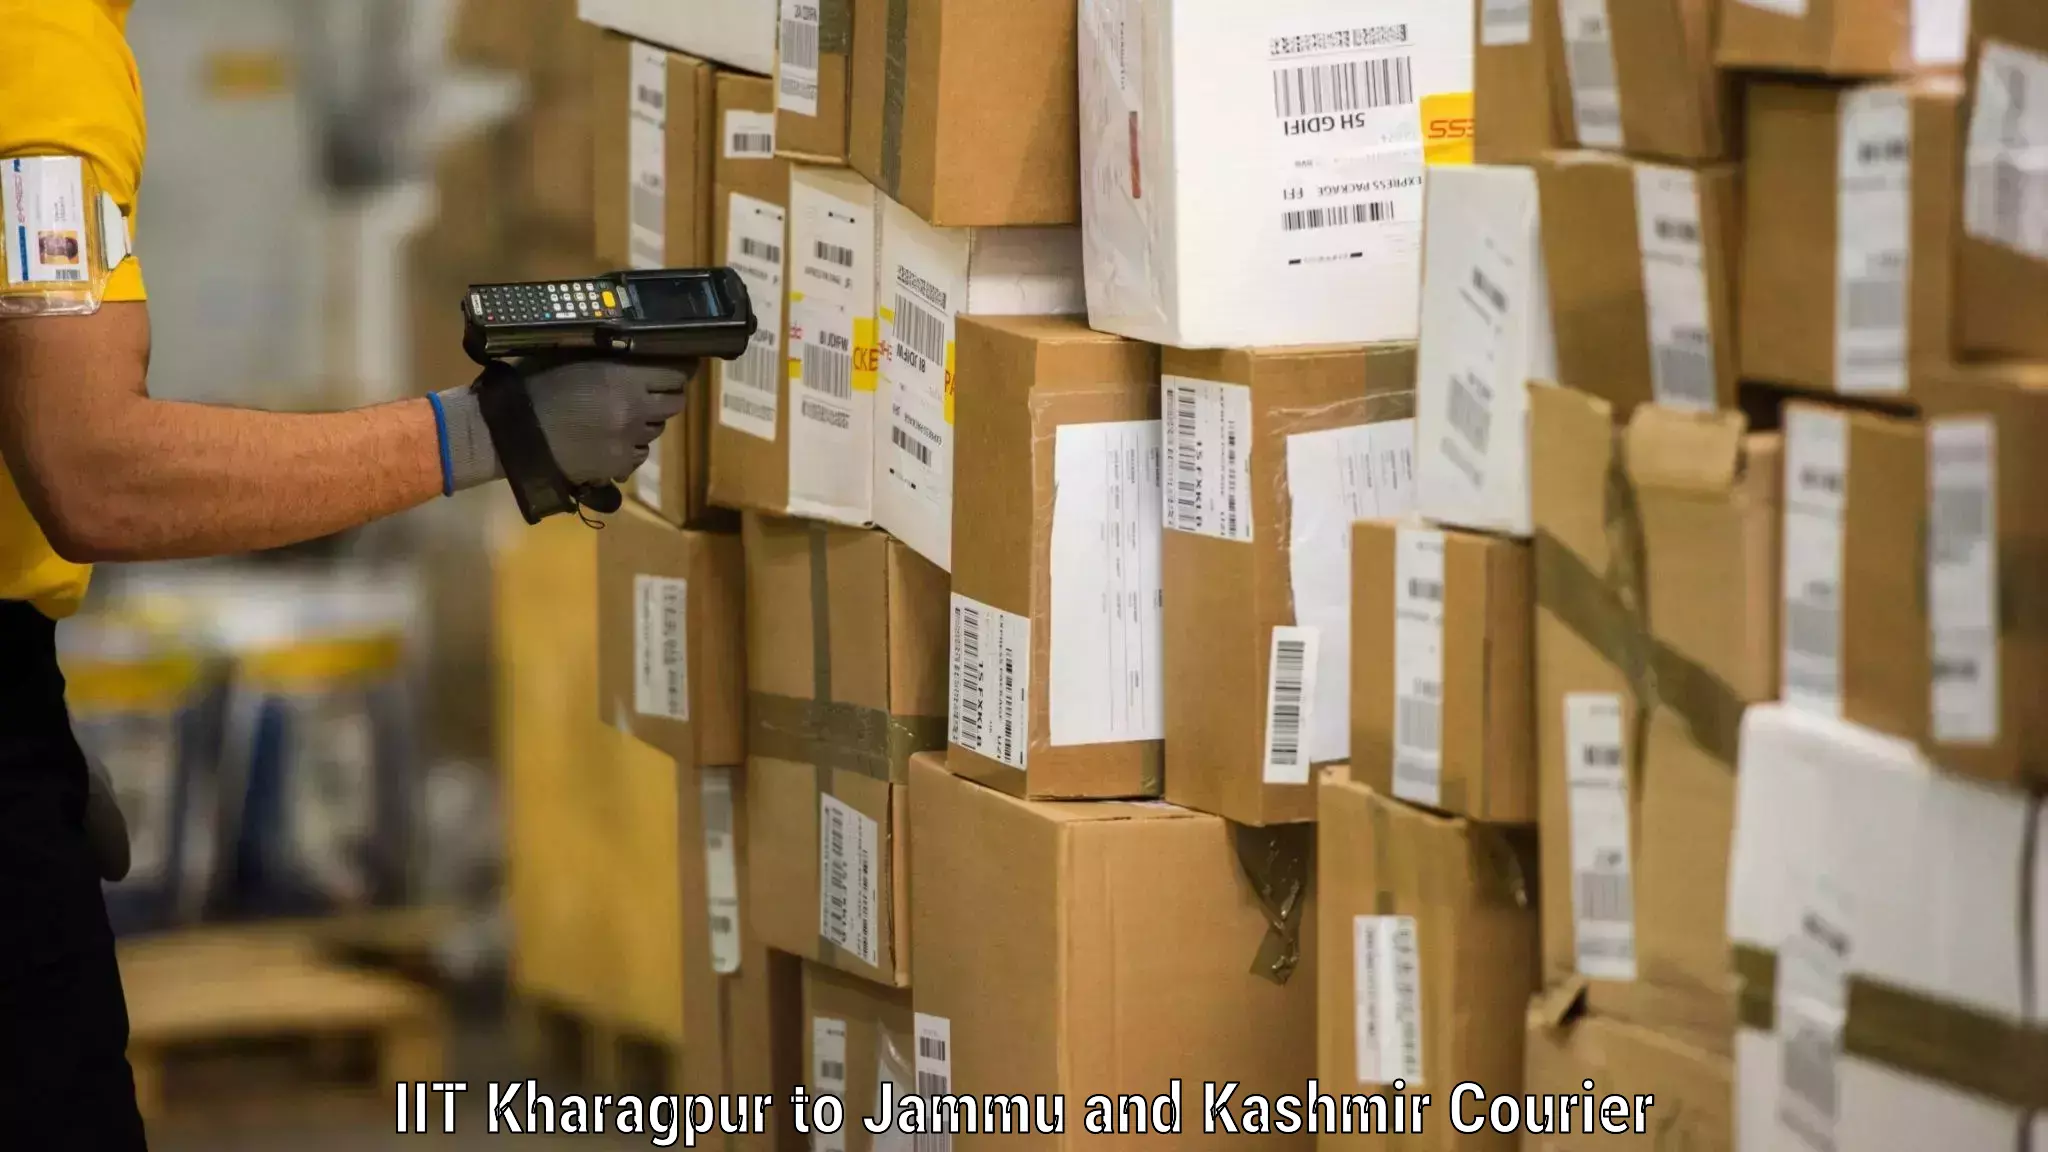 Quality relocation assistance IIT Kharagpur to Jammu and Kashmir